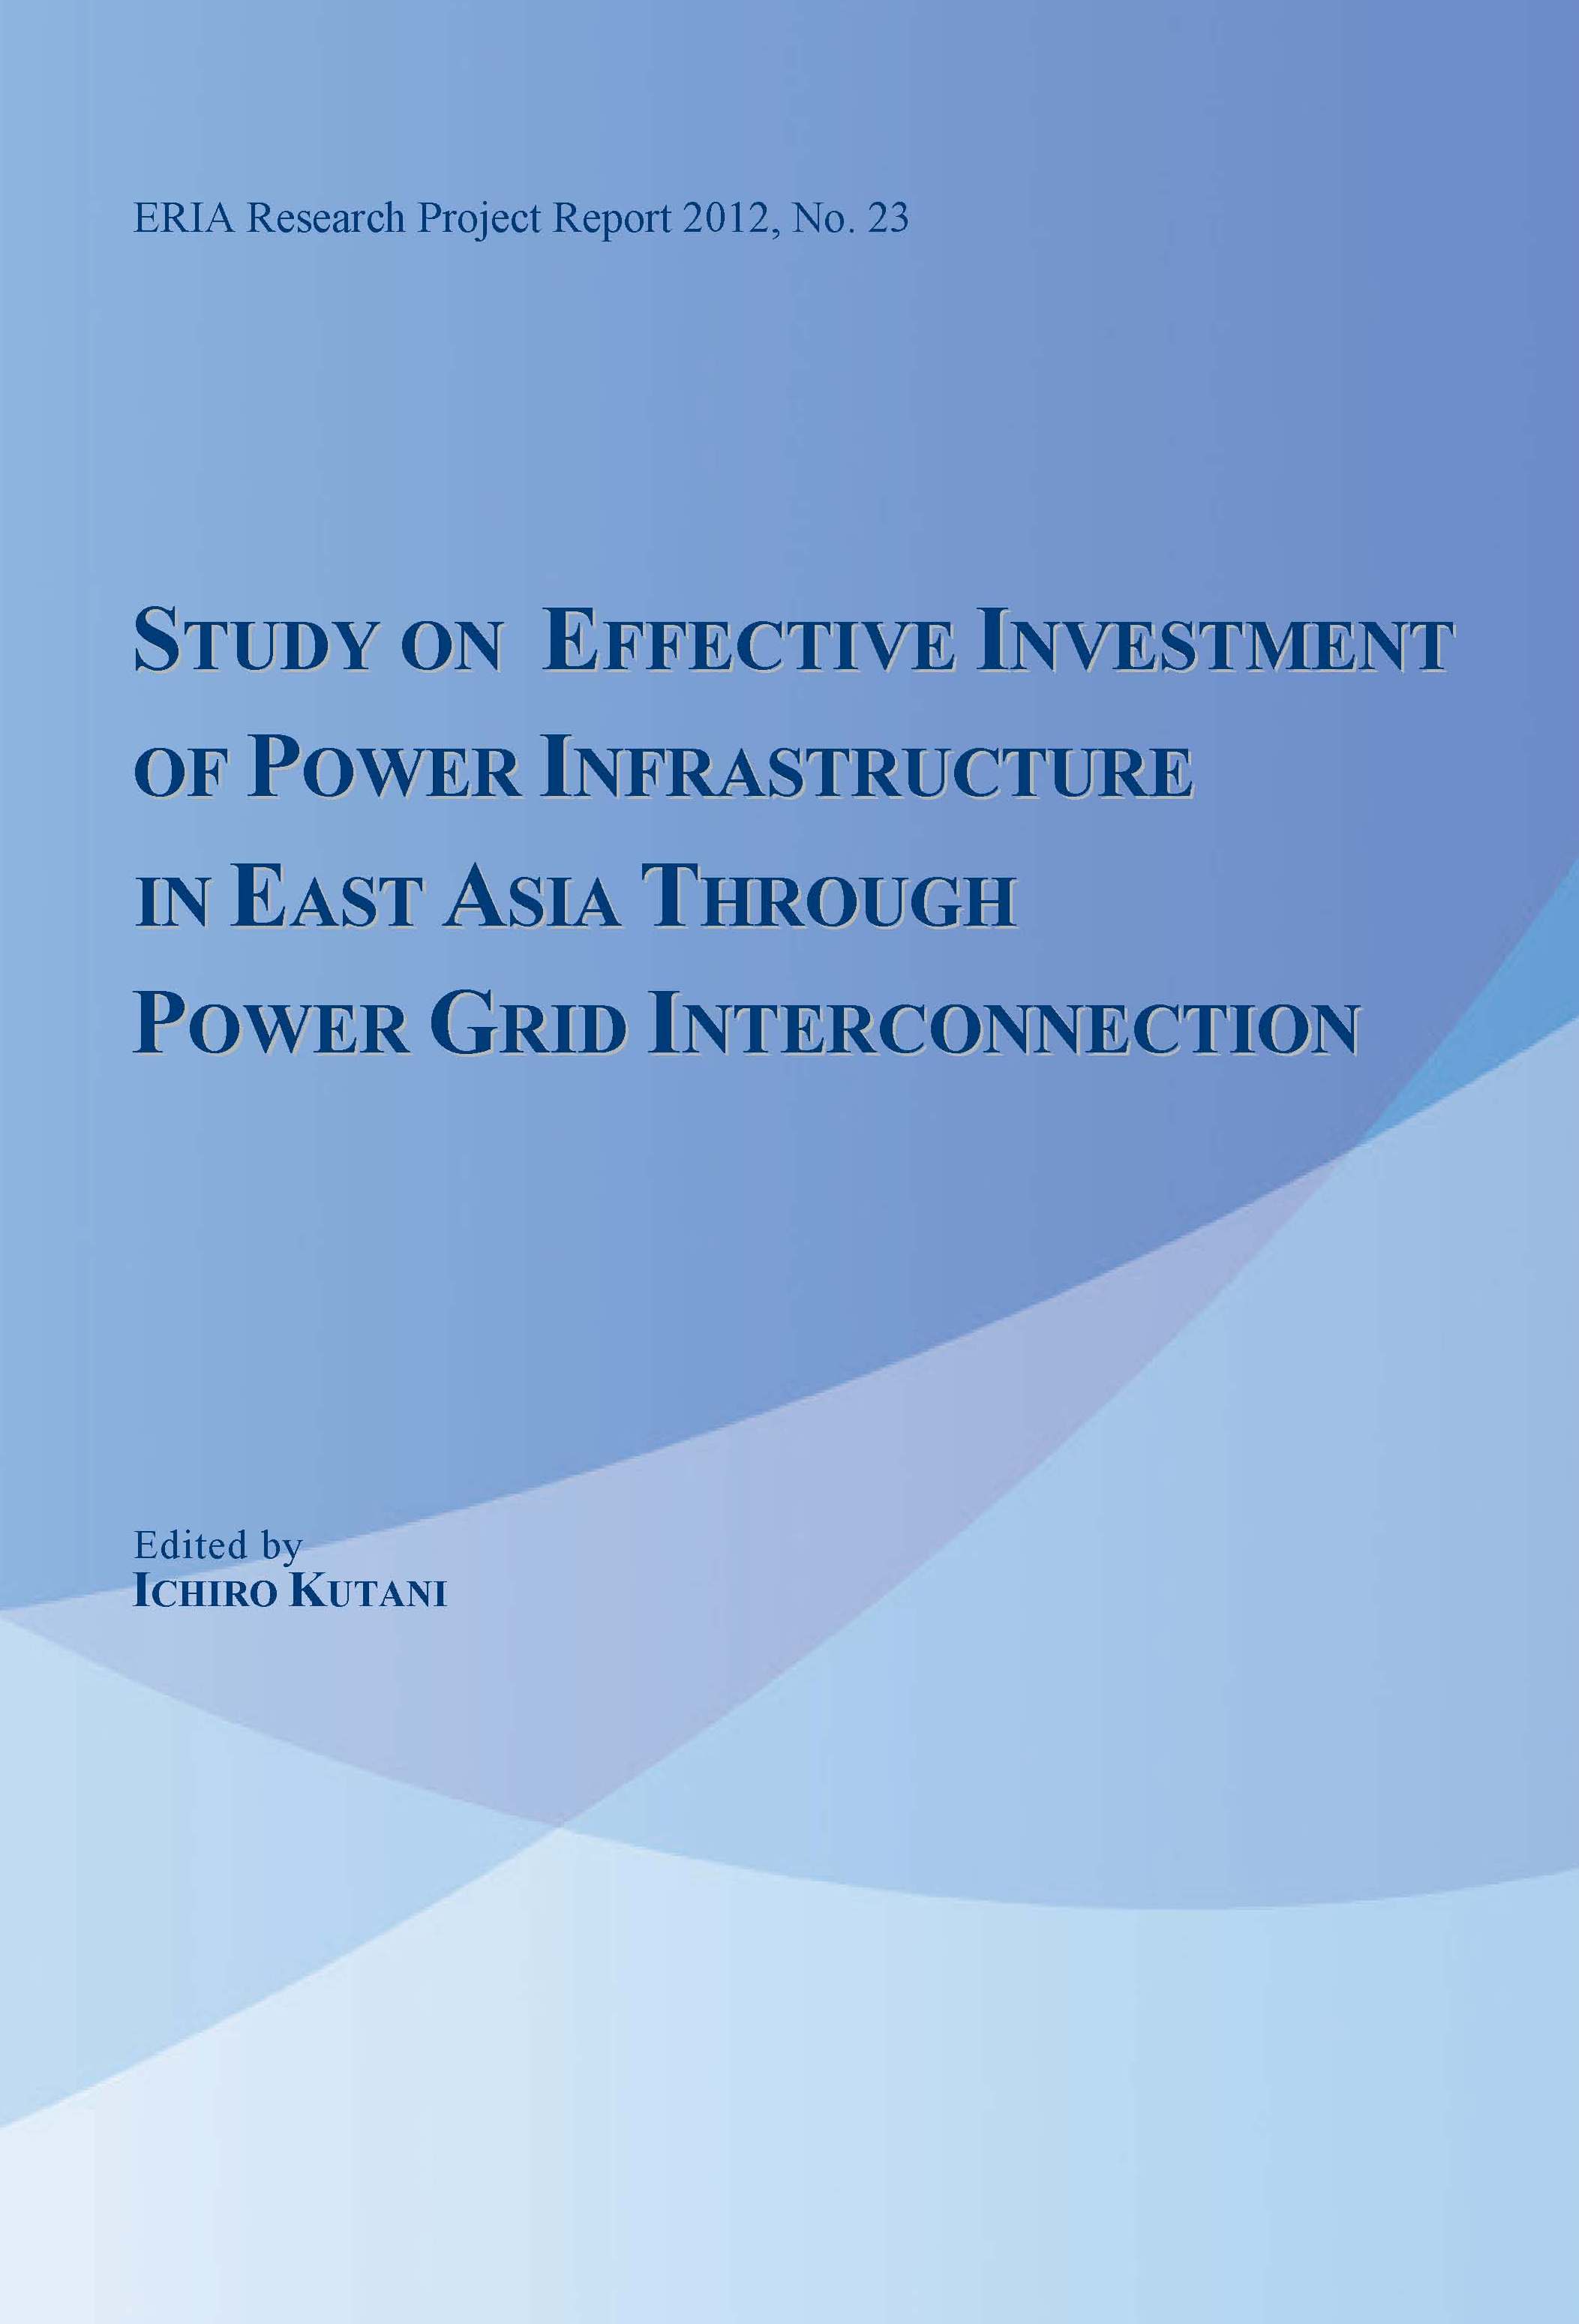 Study on Effective Investment of Power Infrastructure in East Asia through Power Grid Interconnection